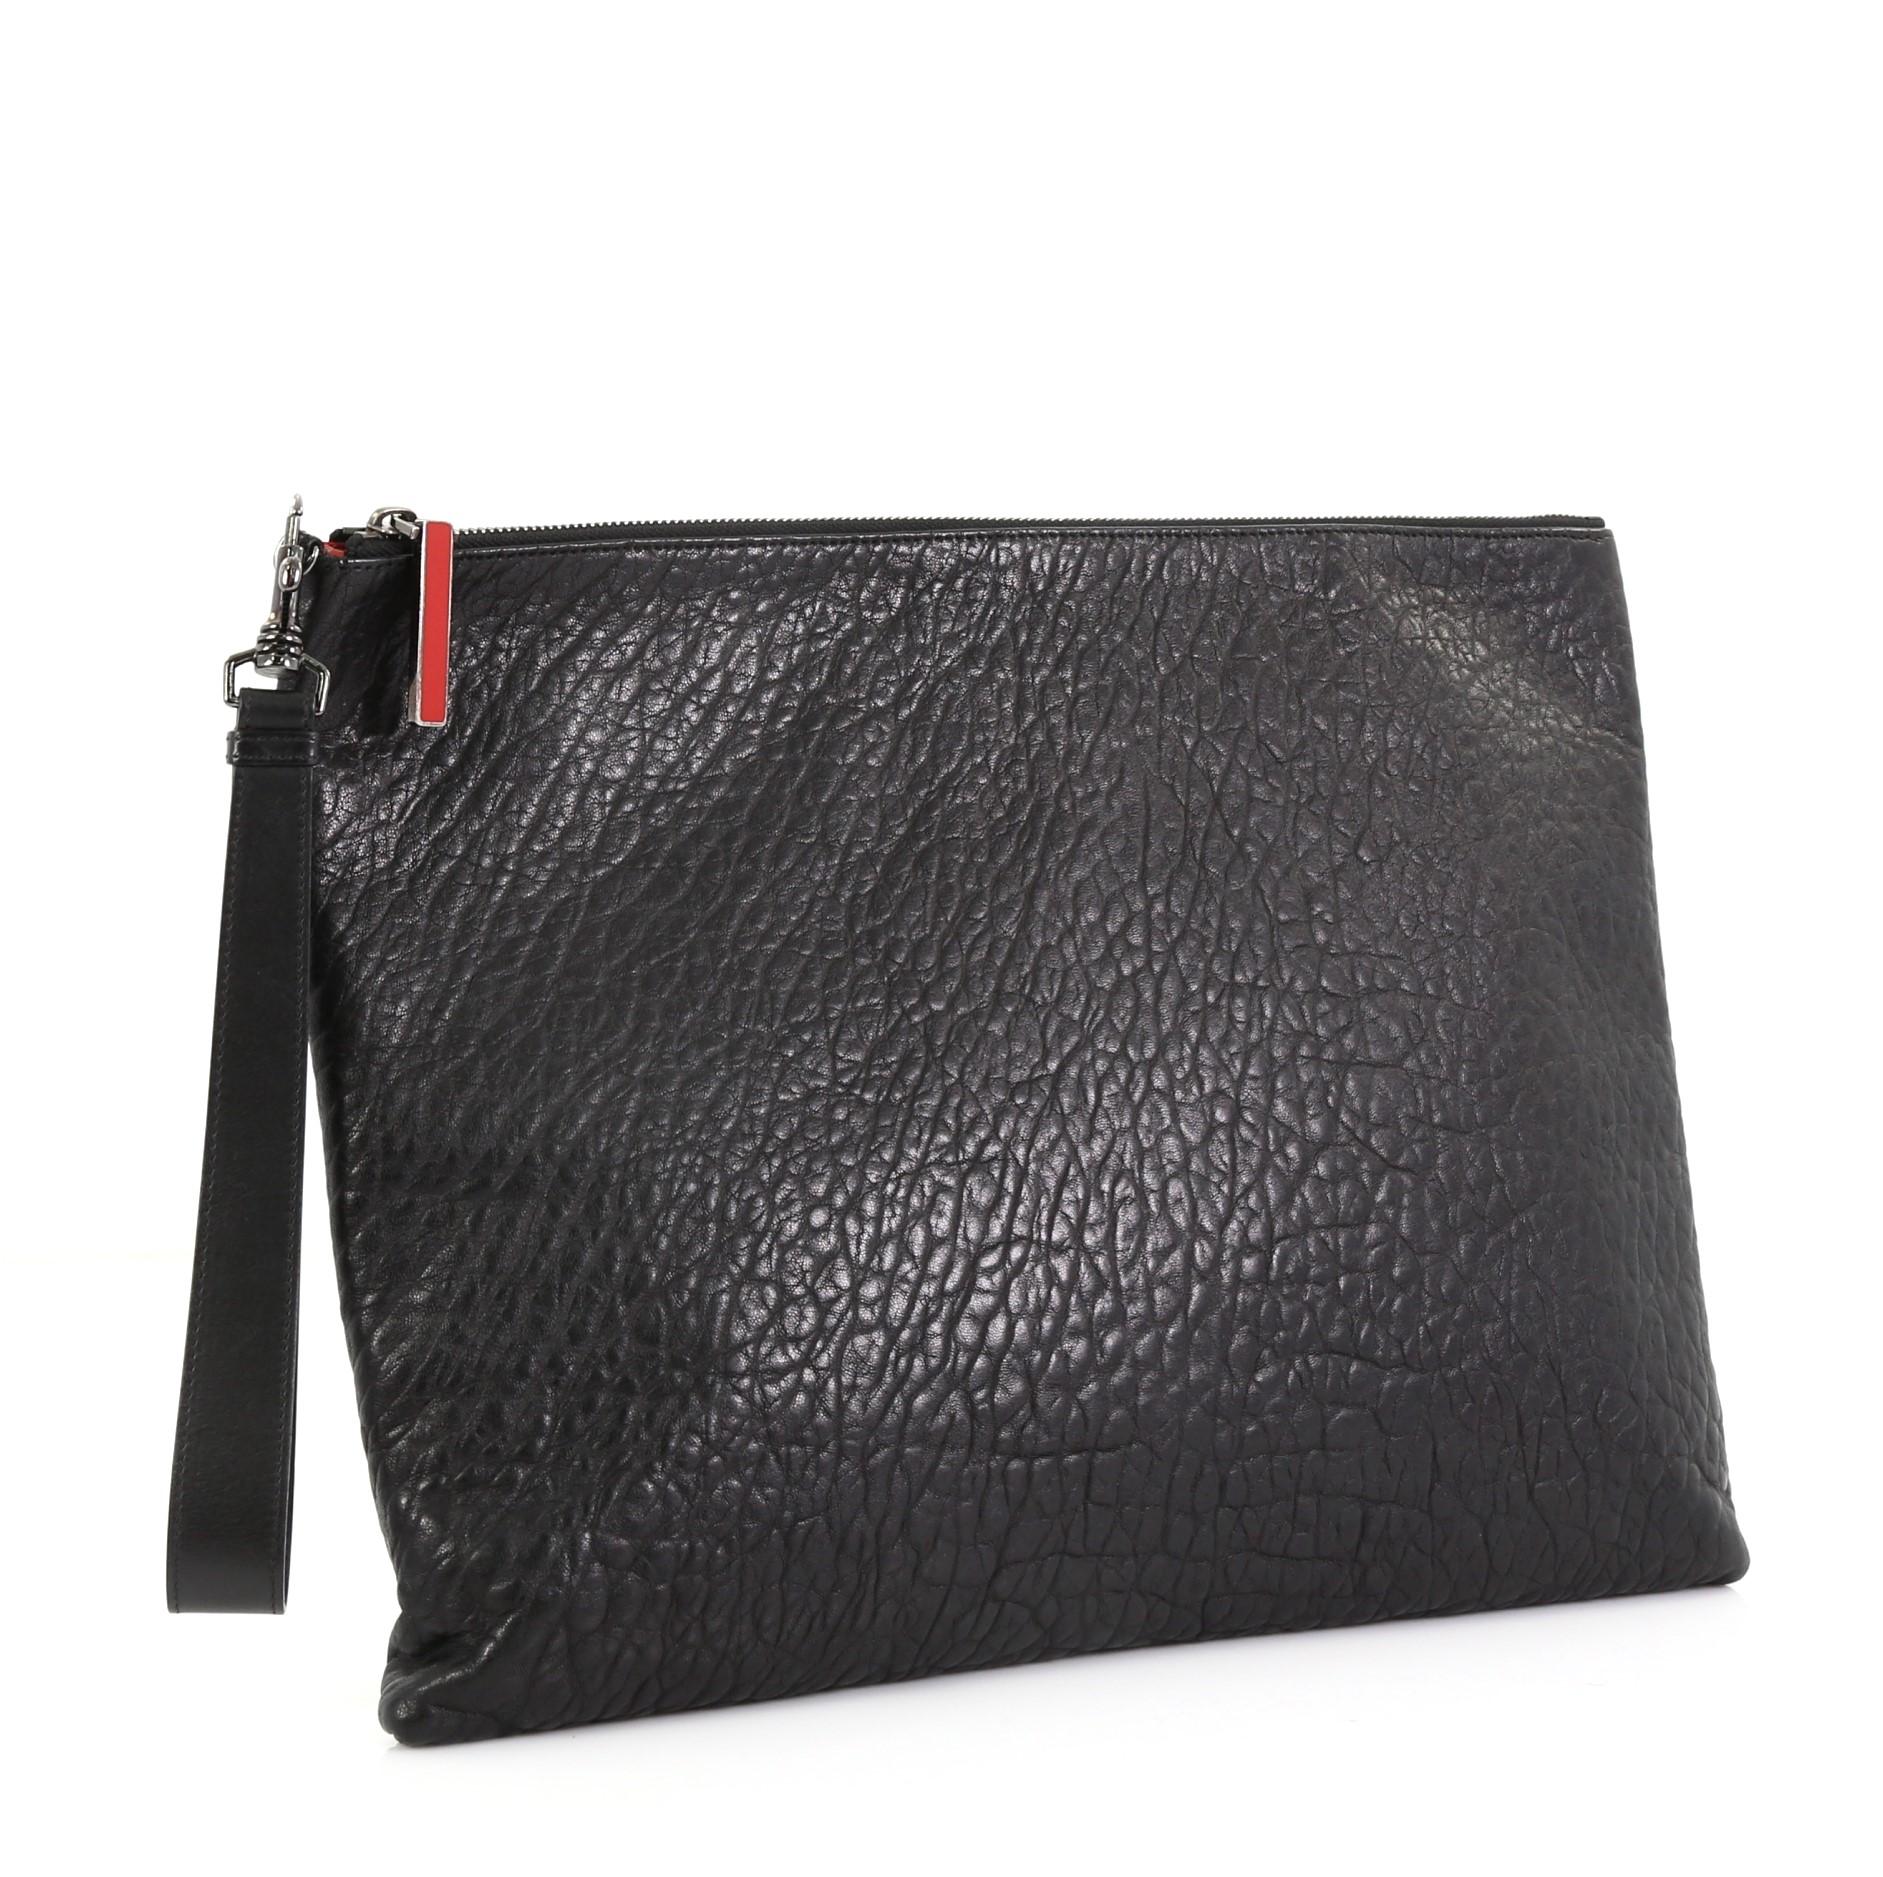 This Christian Louboutin Peter Pouch Leather Medium, crafted from black leather, features a wristlet strap, exterior back zip pocket, and aged silver-tone hardware. Its zip closure opens to a red fabric and leather interior with multiple card slots